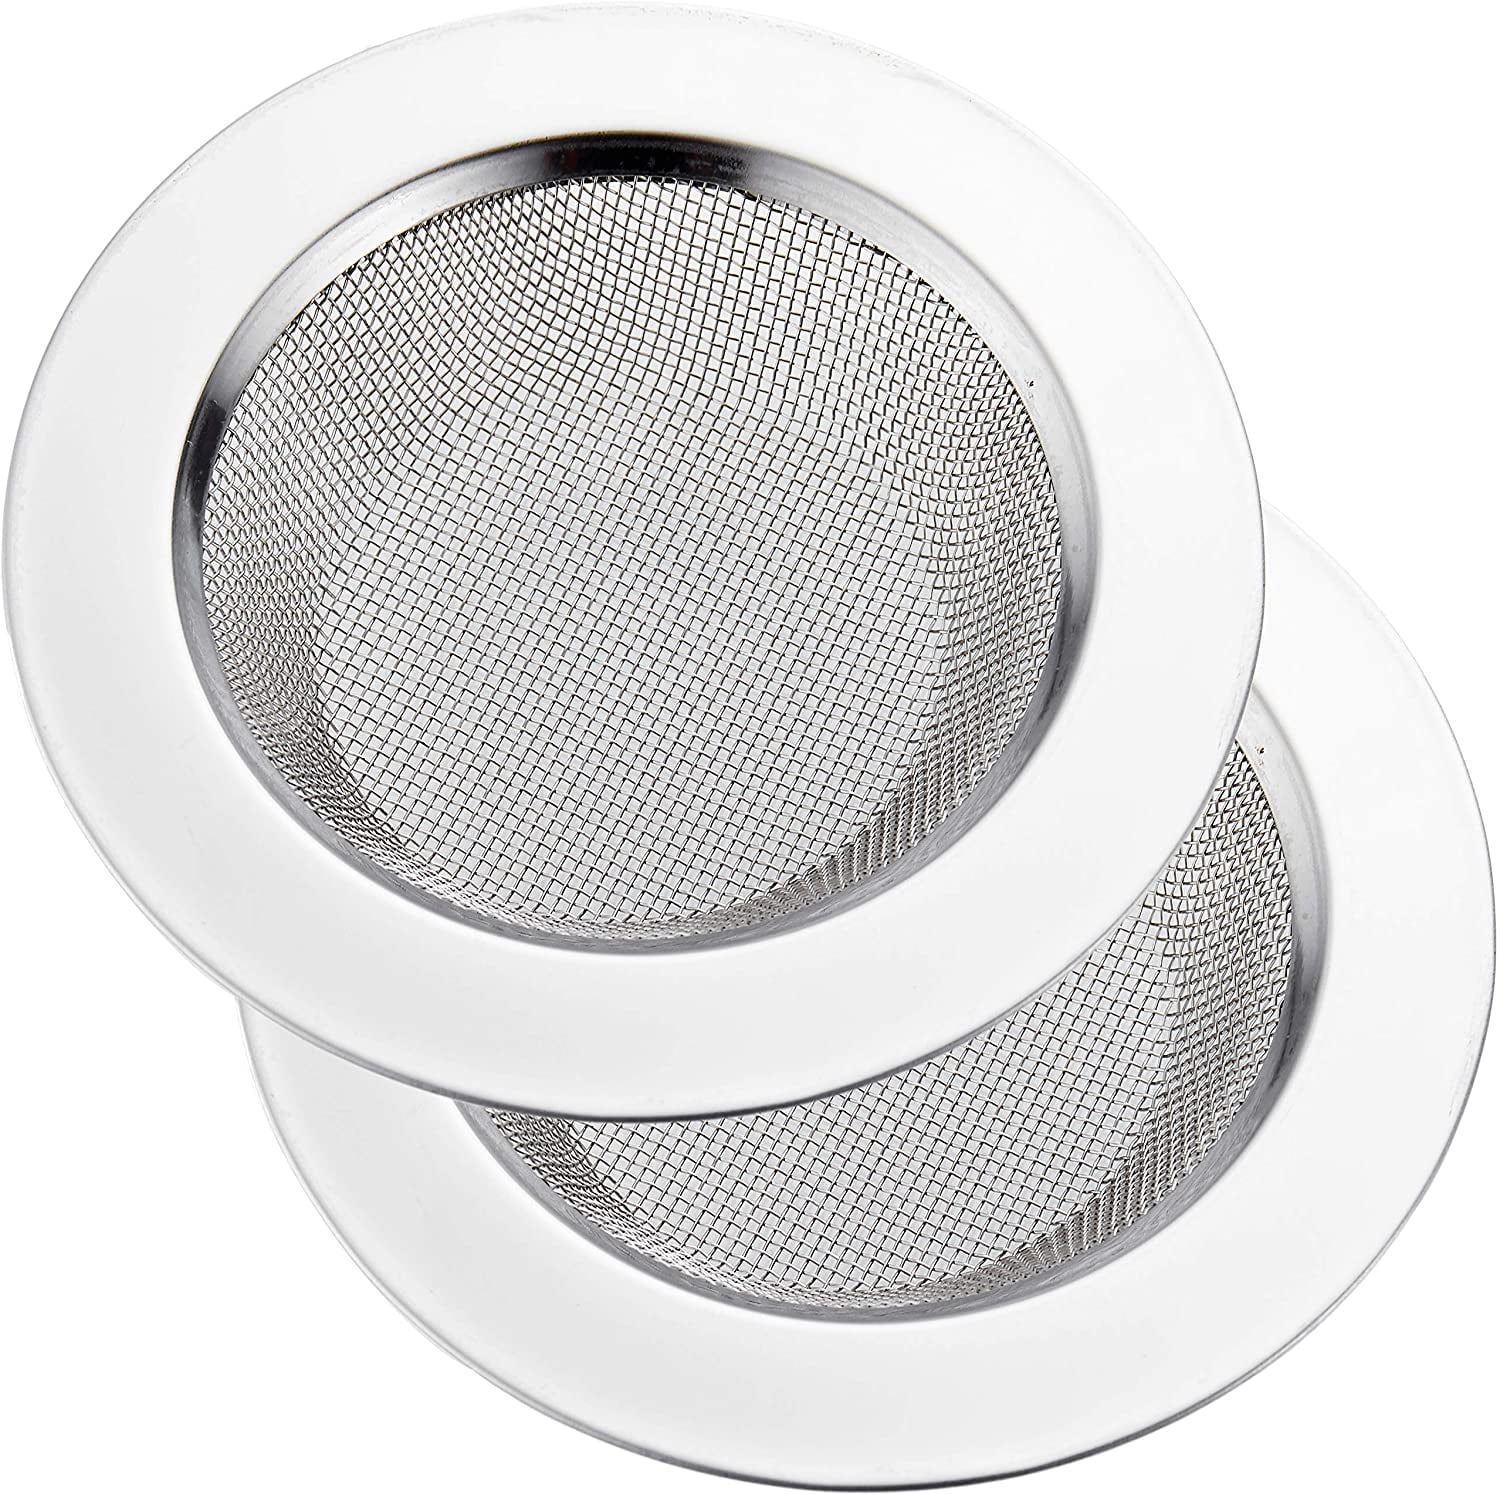 Stainless Steel Kitchen Sink Basket Strainer Waste Insert ONLY for 90mm Hole 